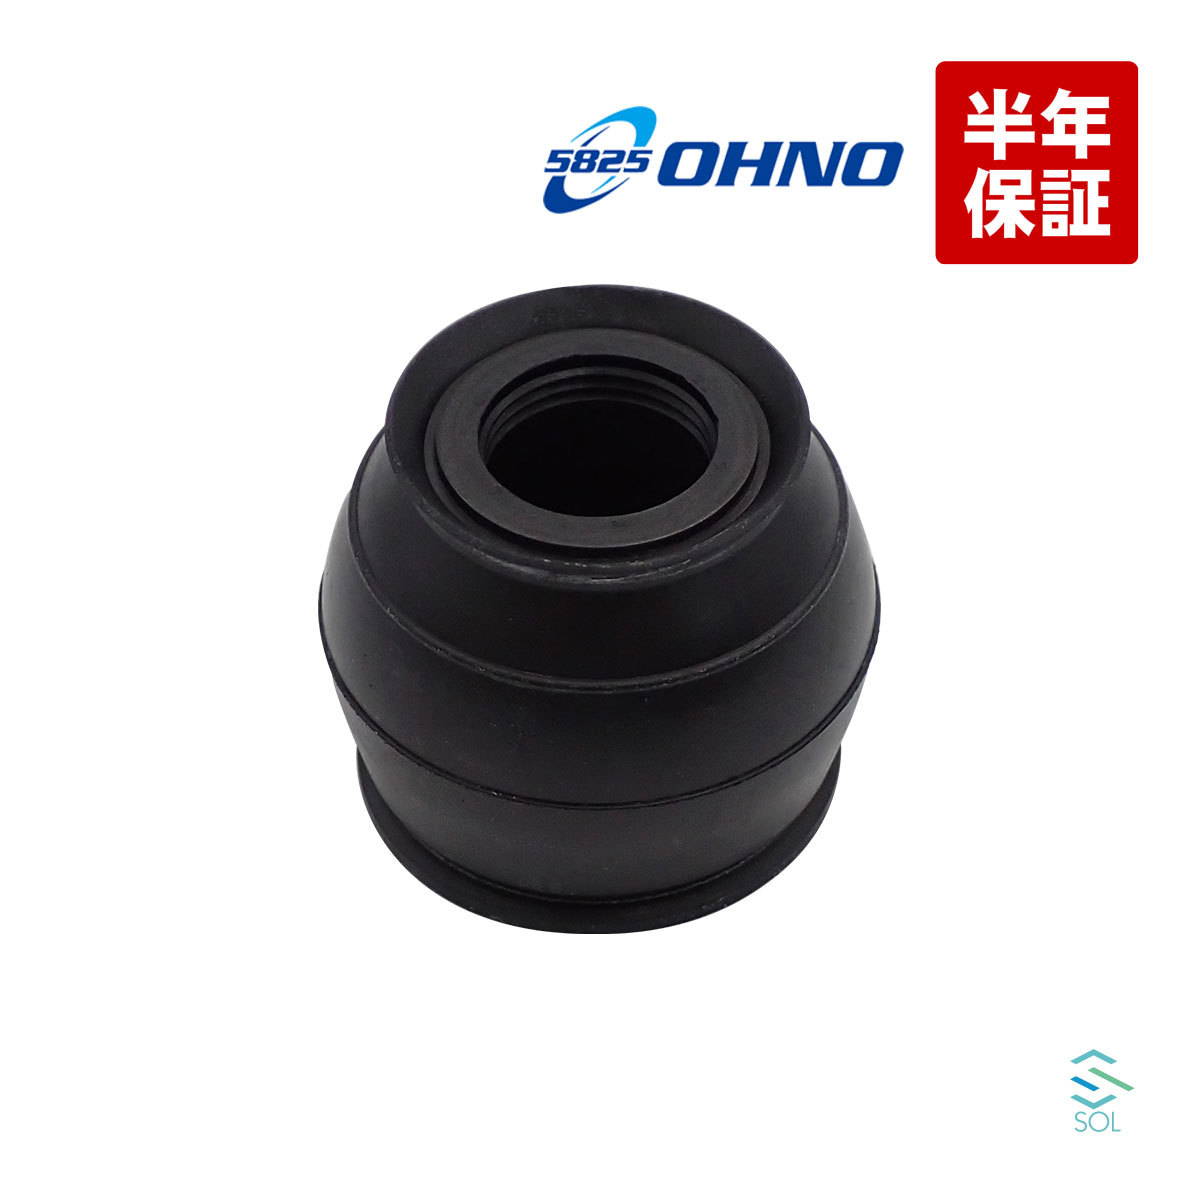  Oono rubber stabilizer link boots BRZ ZC6 ZD8 Toyota 86 ZN6 GRMN86 OHNO ball joint ball joint DC-2663